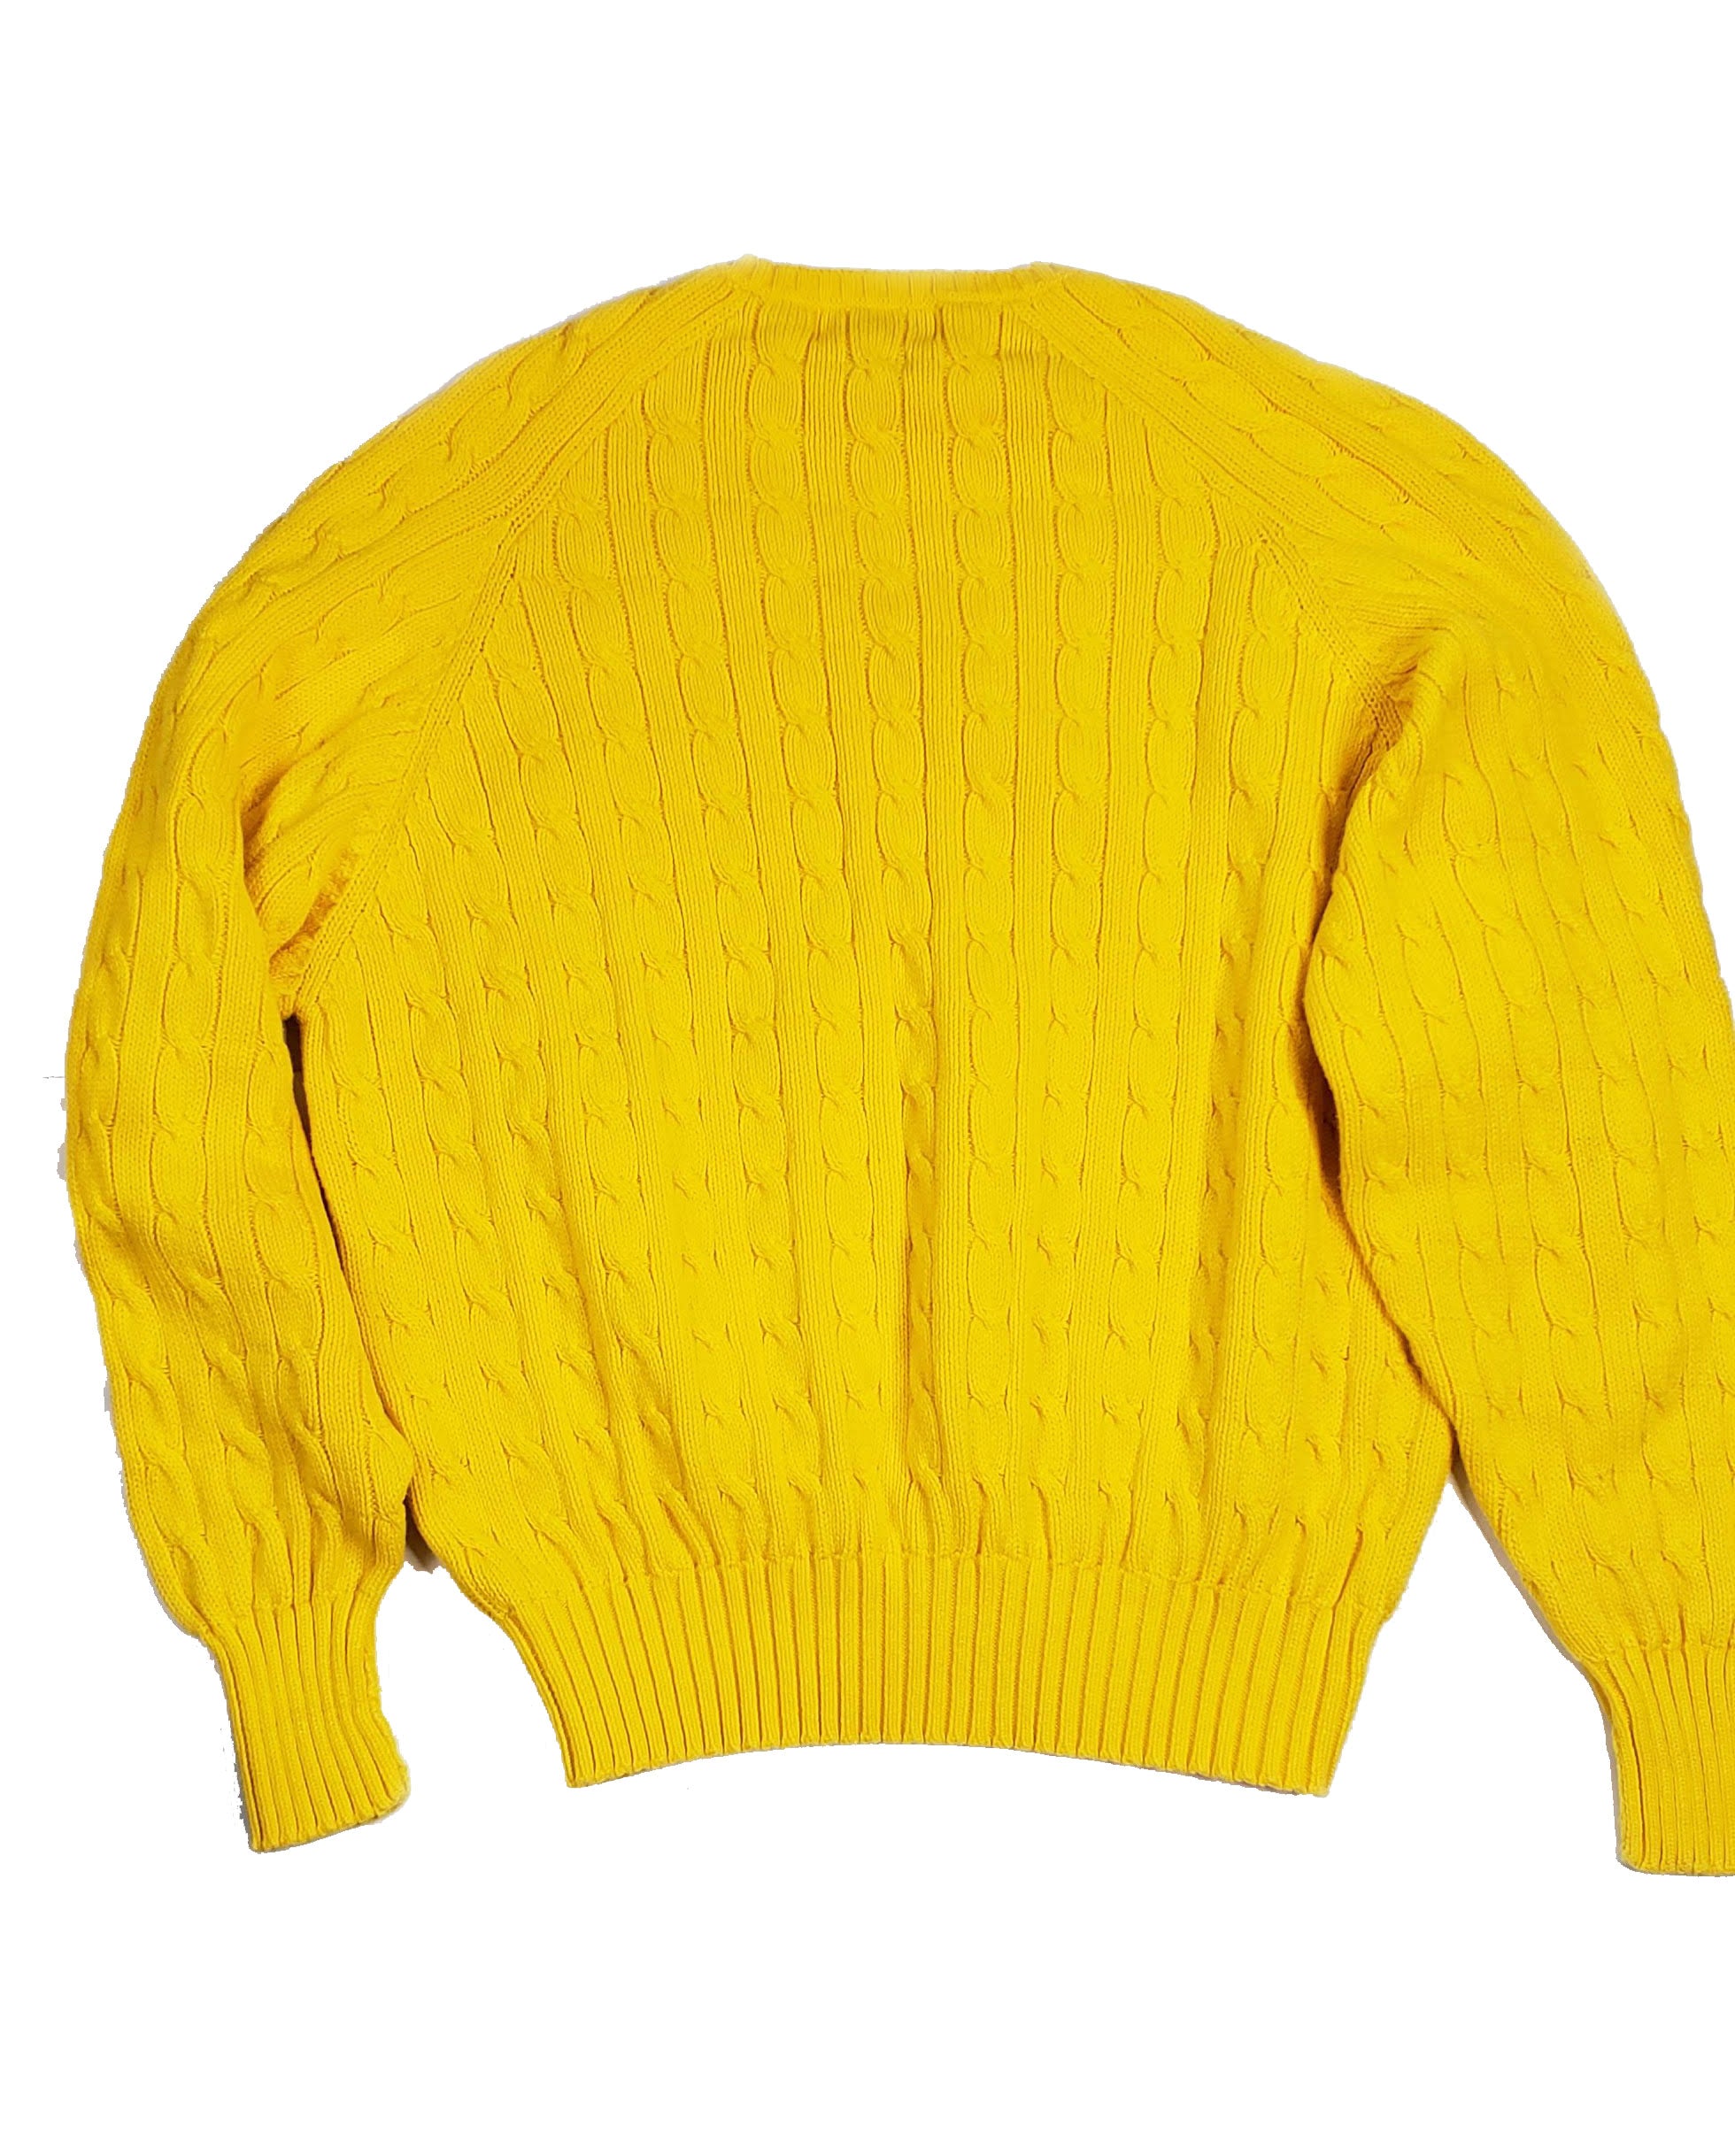 Men's Yellow Polo Cable Knit V-Neck Sweater